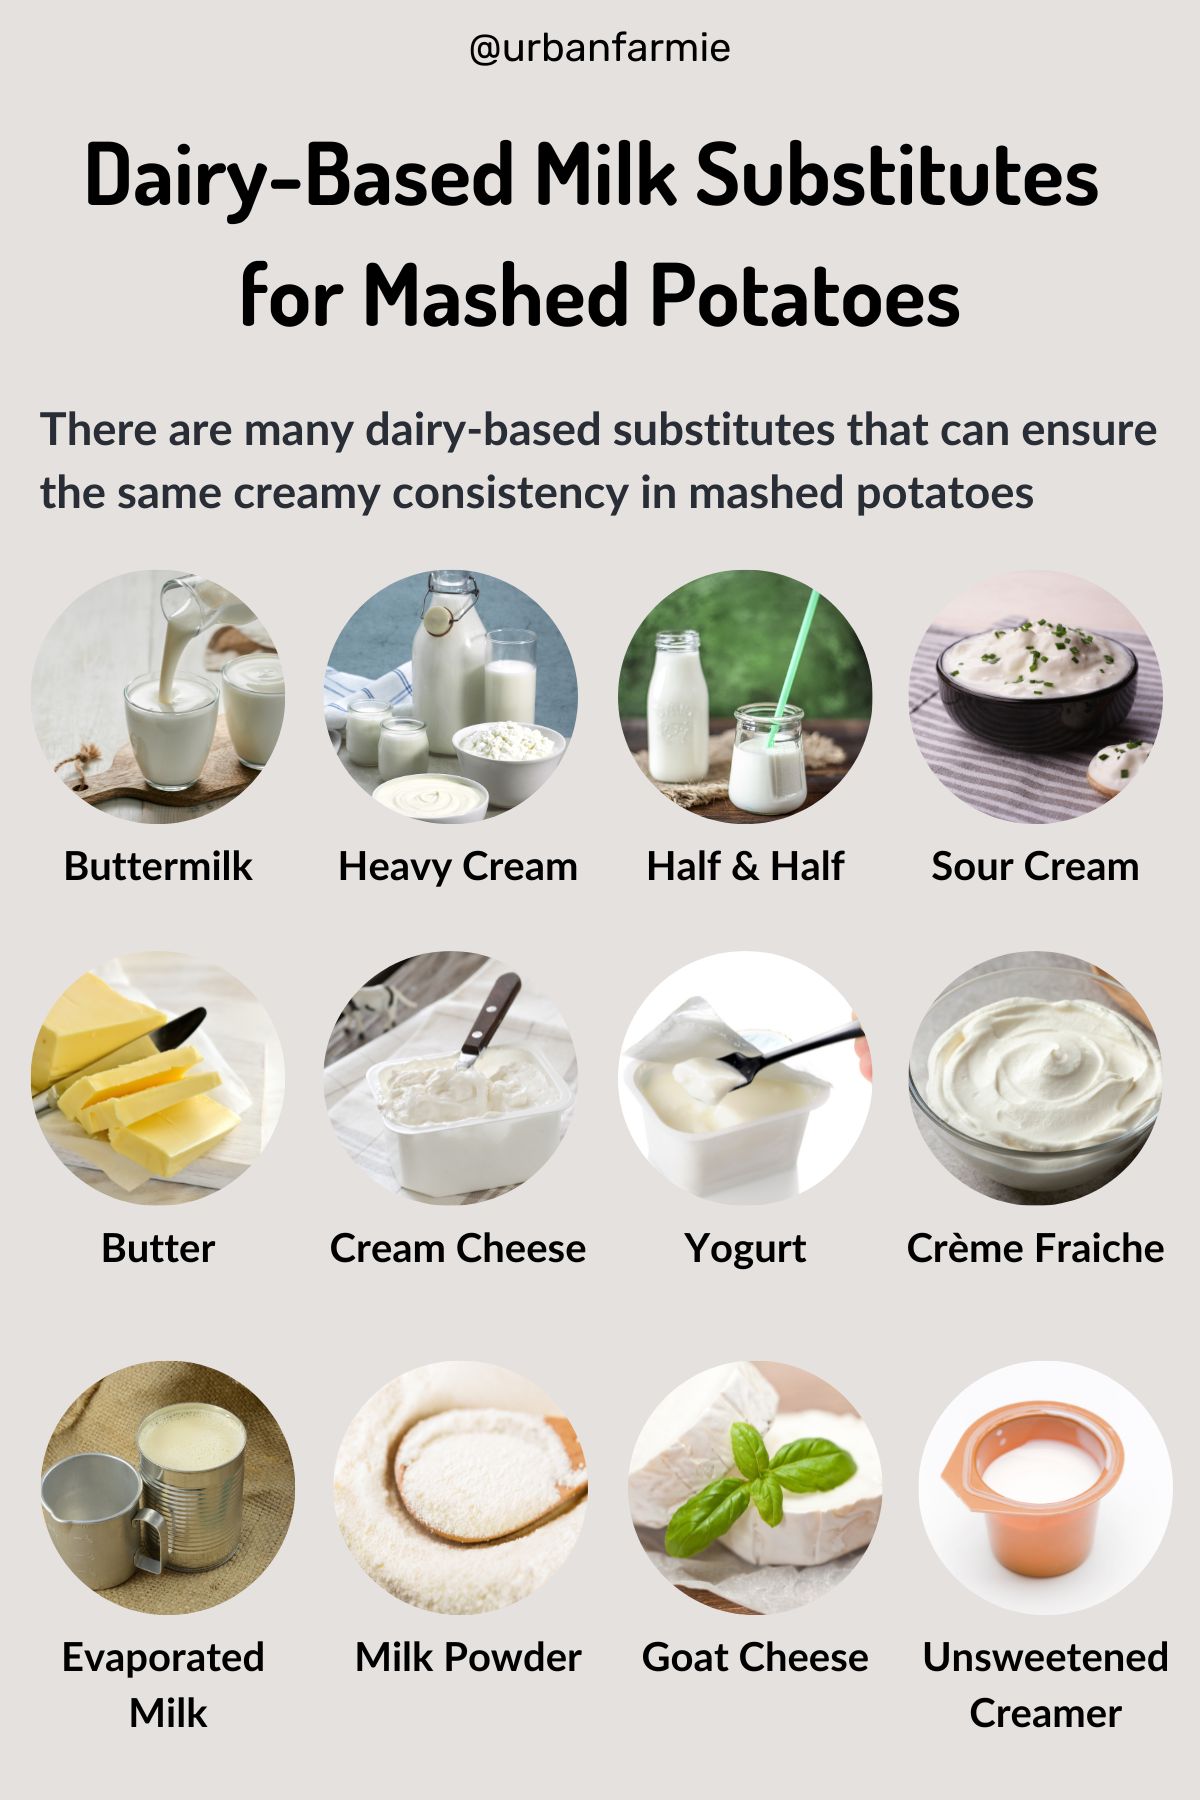 Infographic showing pictures of 12 common substitutes for milk in mashed potatoes.